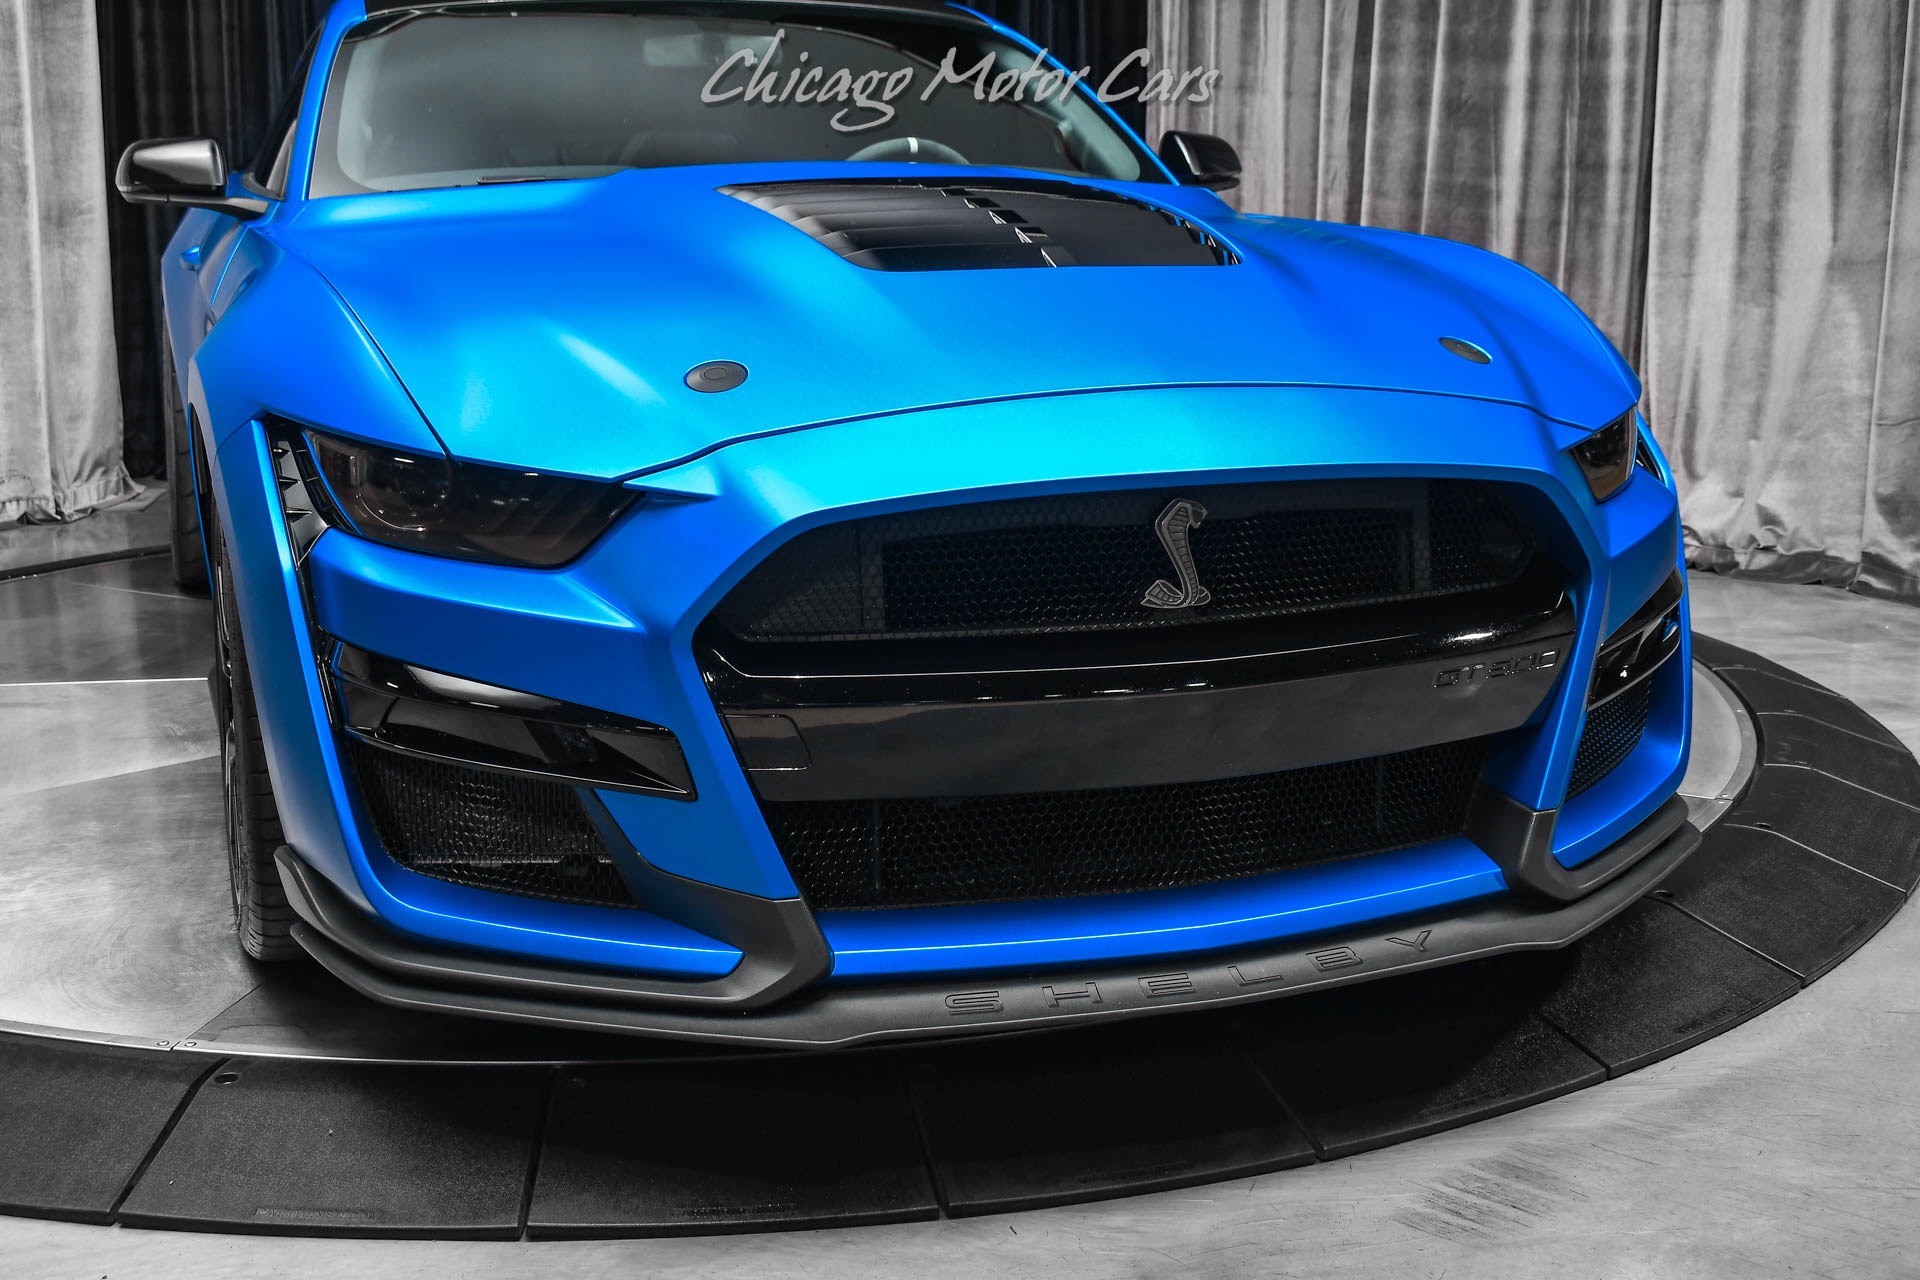 Used 2020 Ford Mustang Shelby GT500 Matte Blue Wrap! (Magnetic Grey) Tech  Pkg! Carbon! Super Clean For Sale ($77,800)